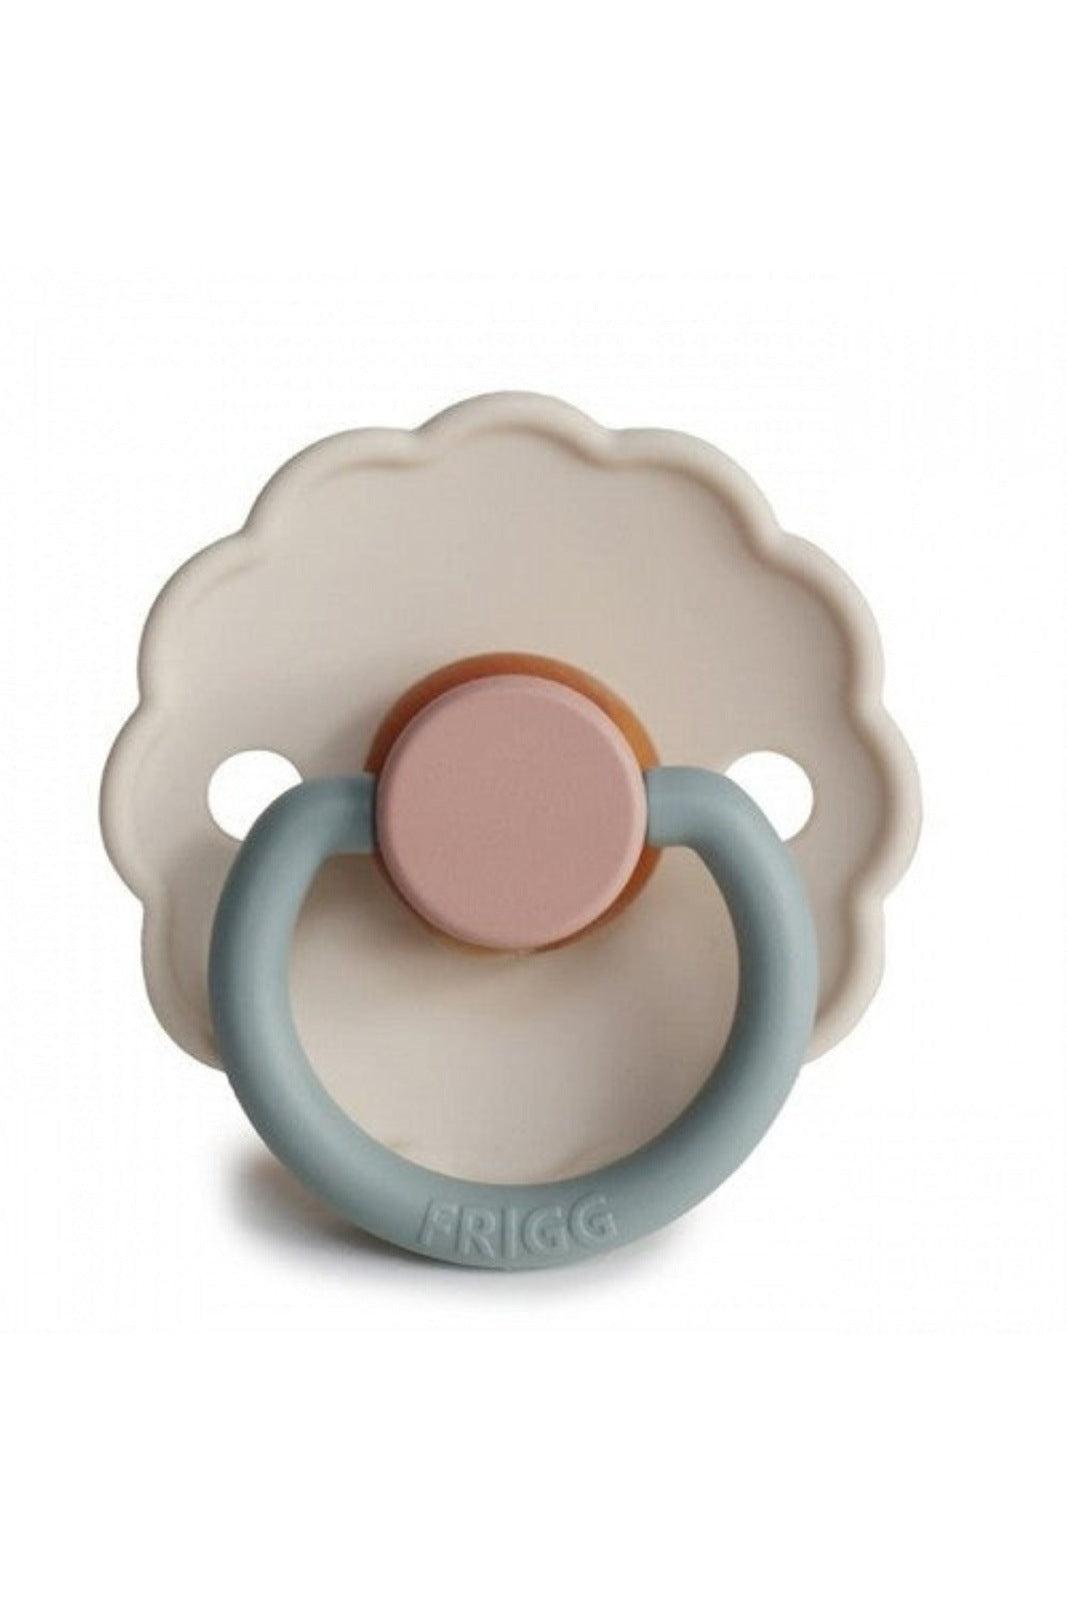 FRIGG Daisy pacifier, Cotton Candy